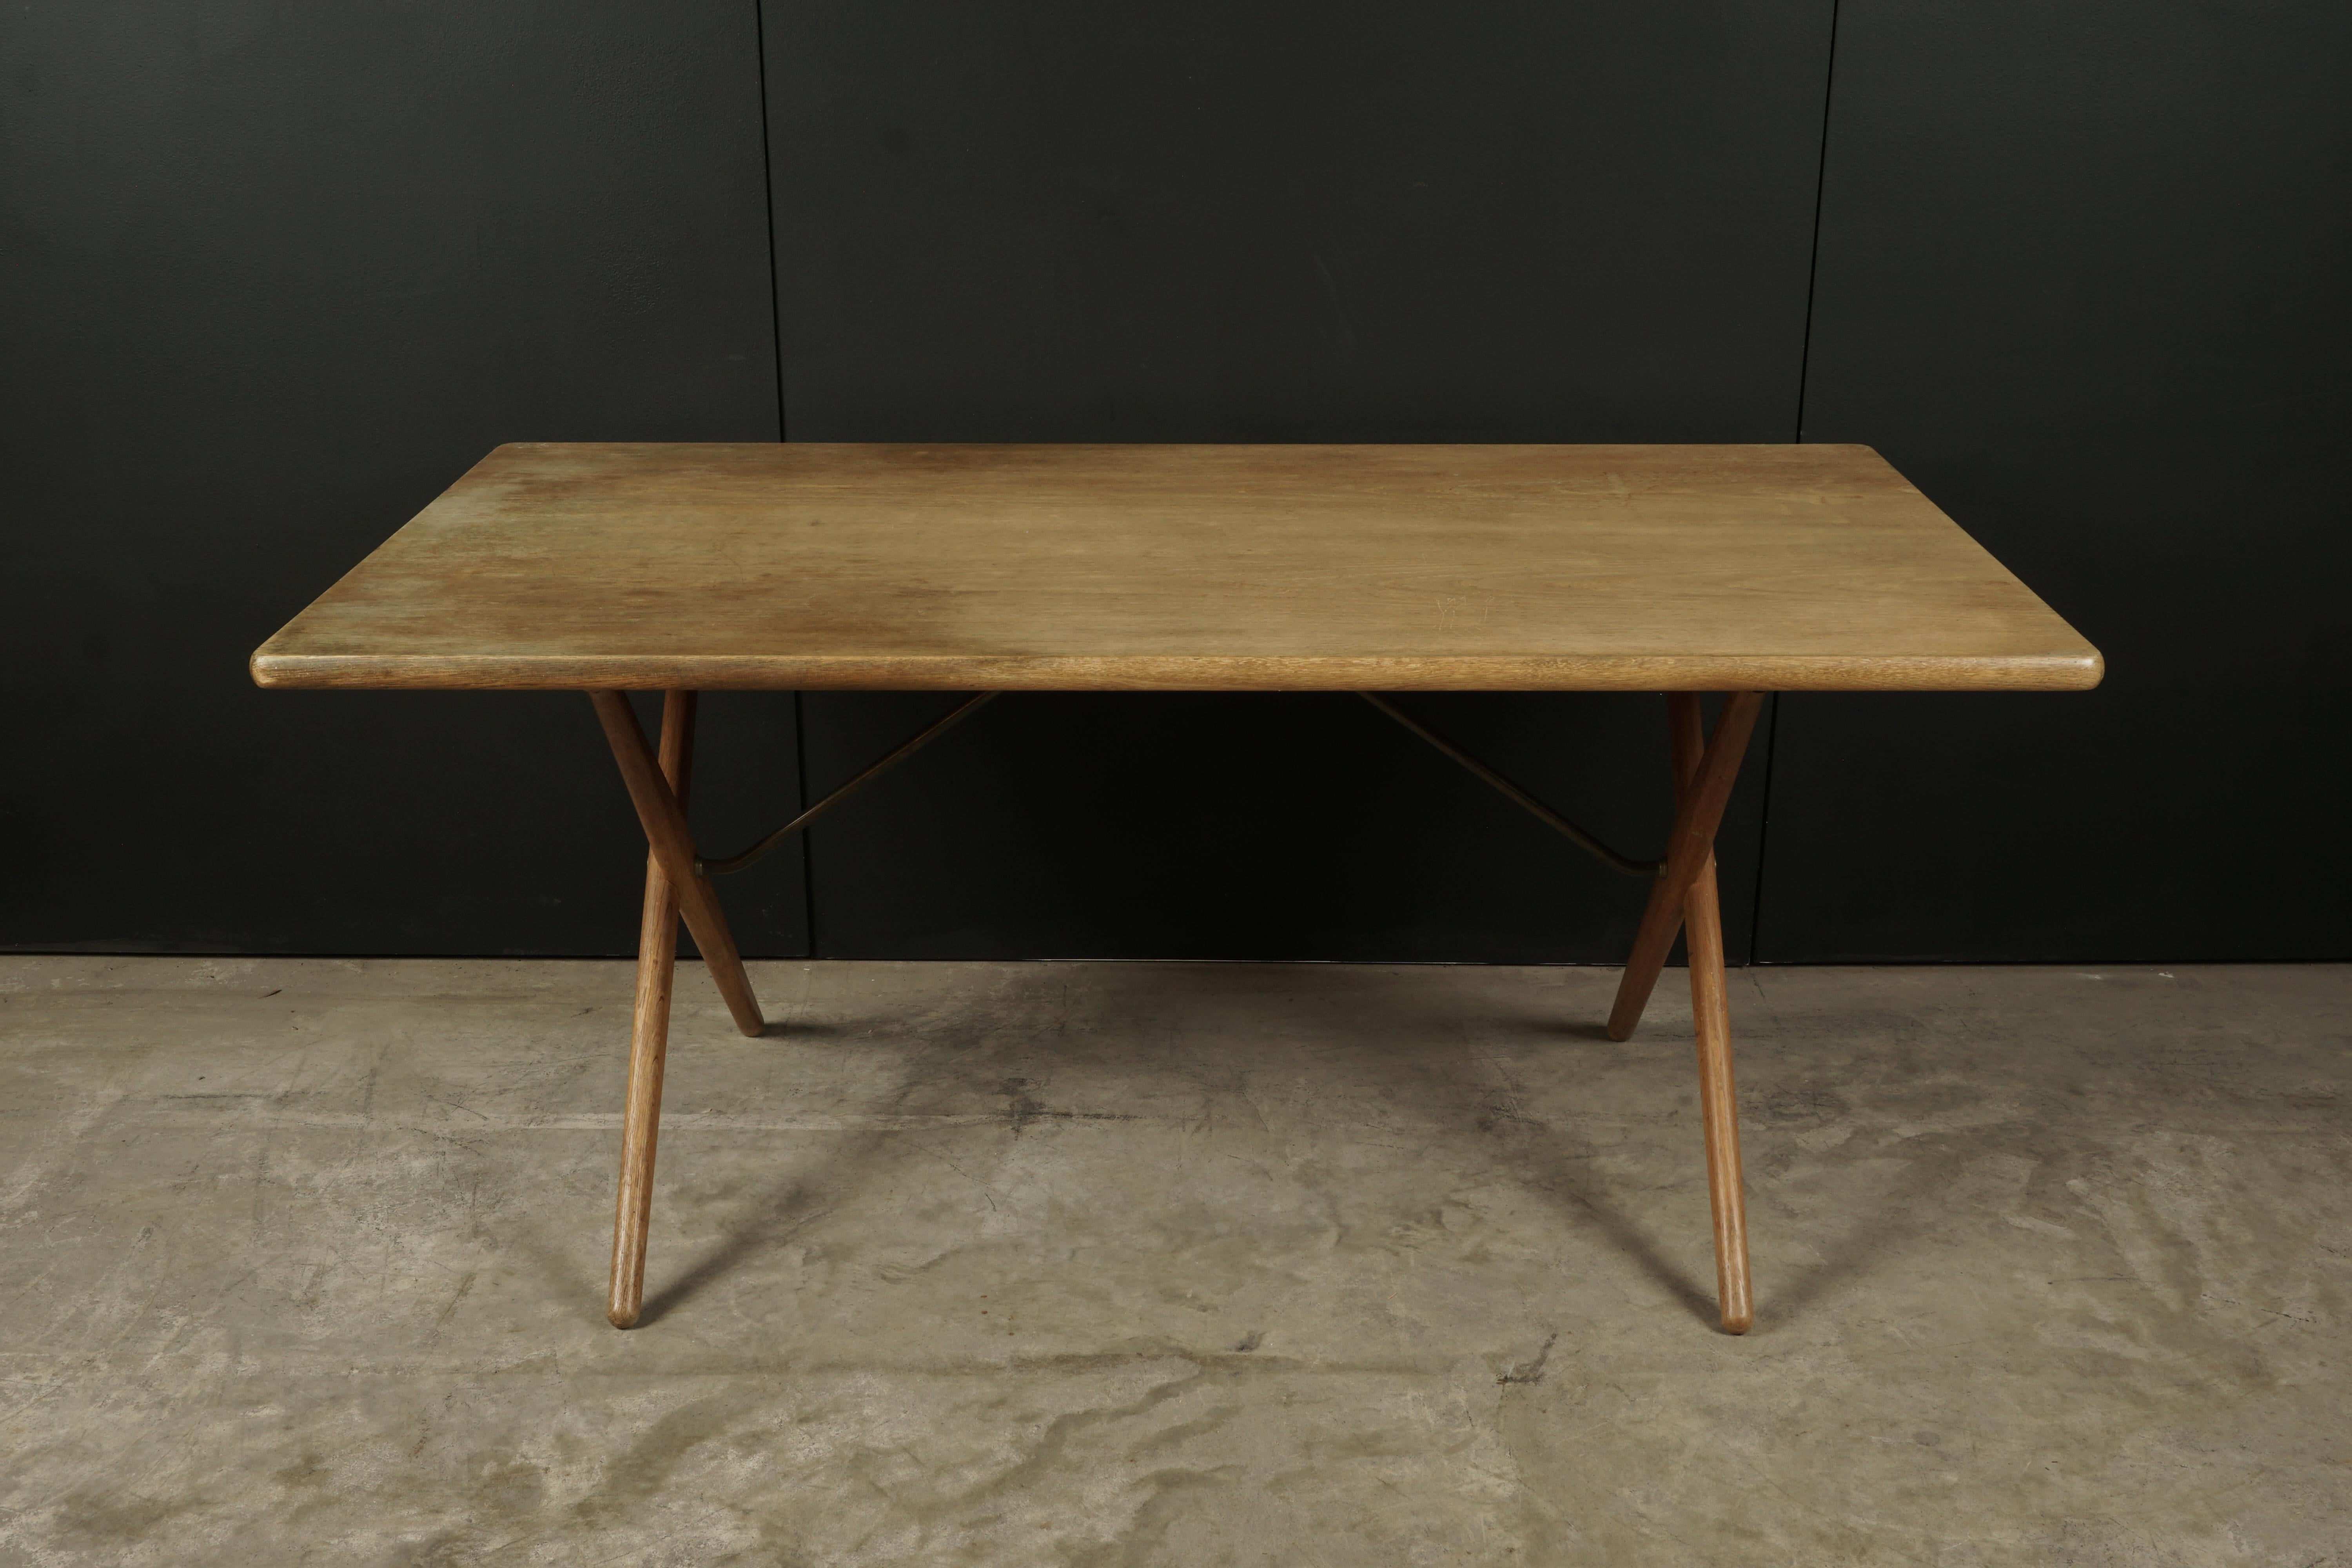 Vintage Hans Wegner AT 303 cross-leg table in oak, designed in 1955 and produced by Andreas Tuck, Denmark. Solid oak construction with brass supports on base. Nice wear and patina.